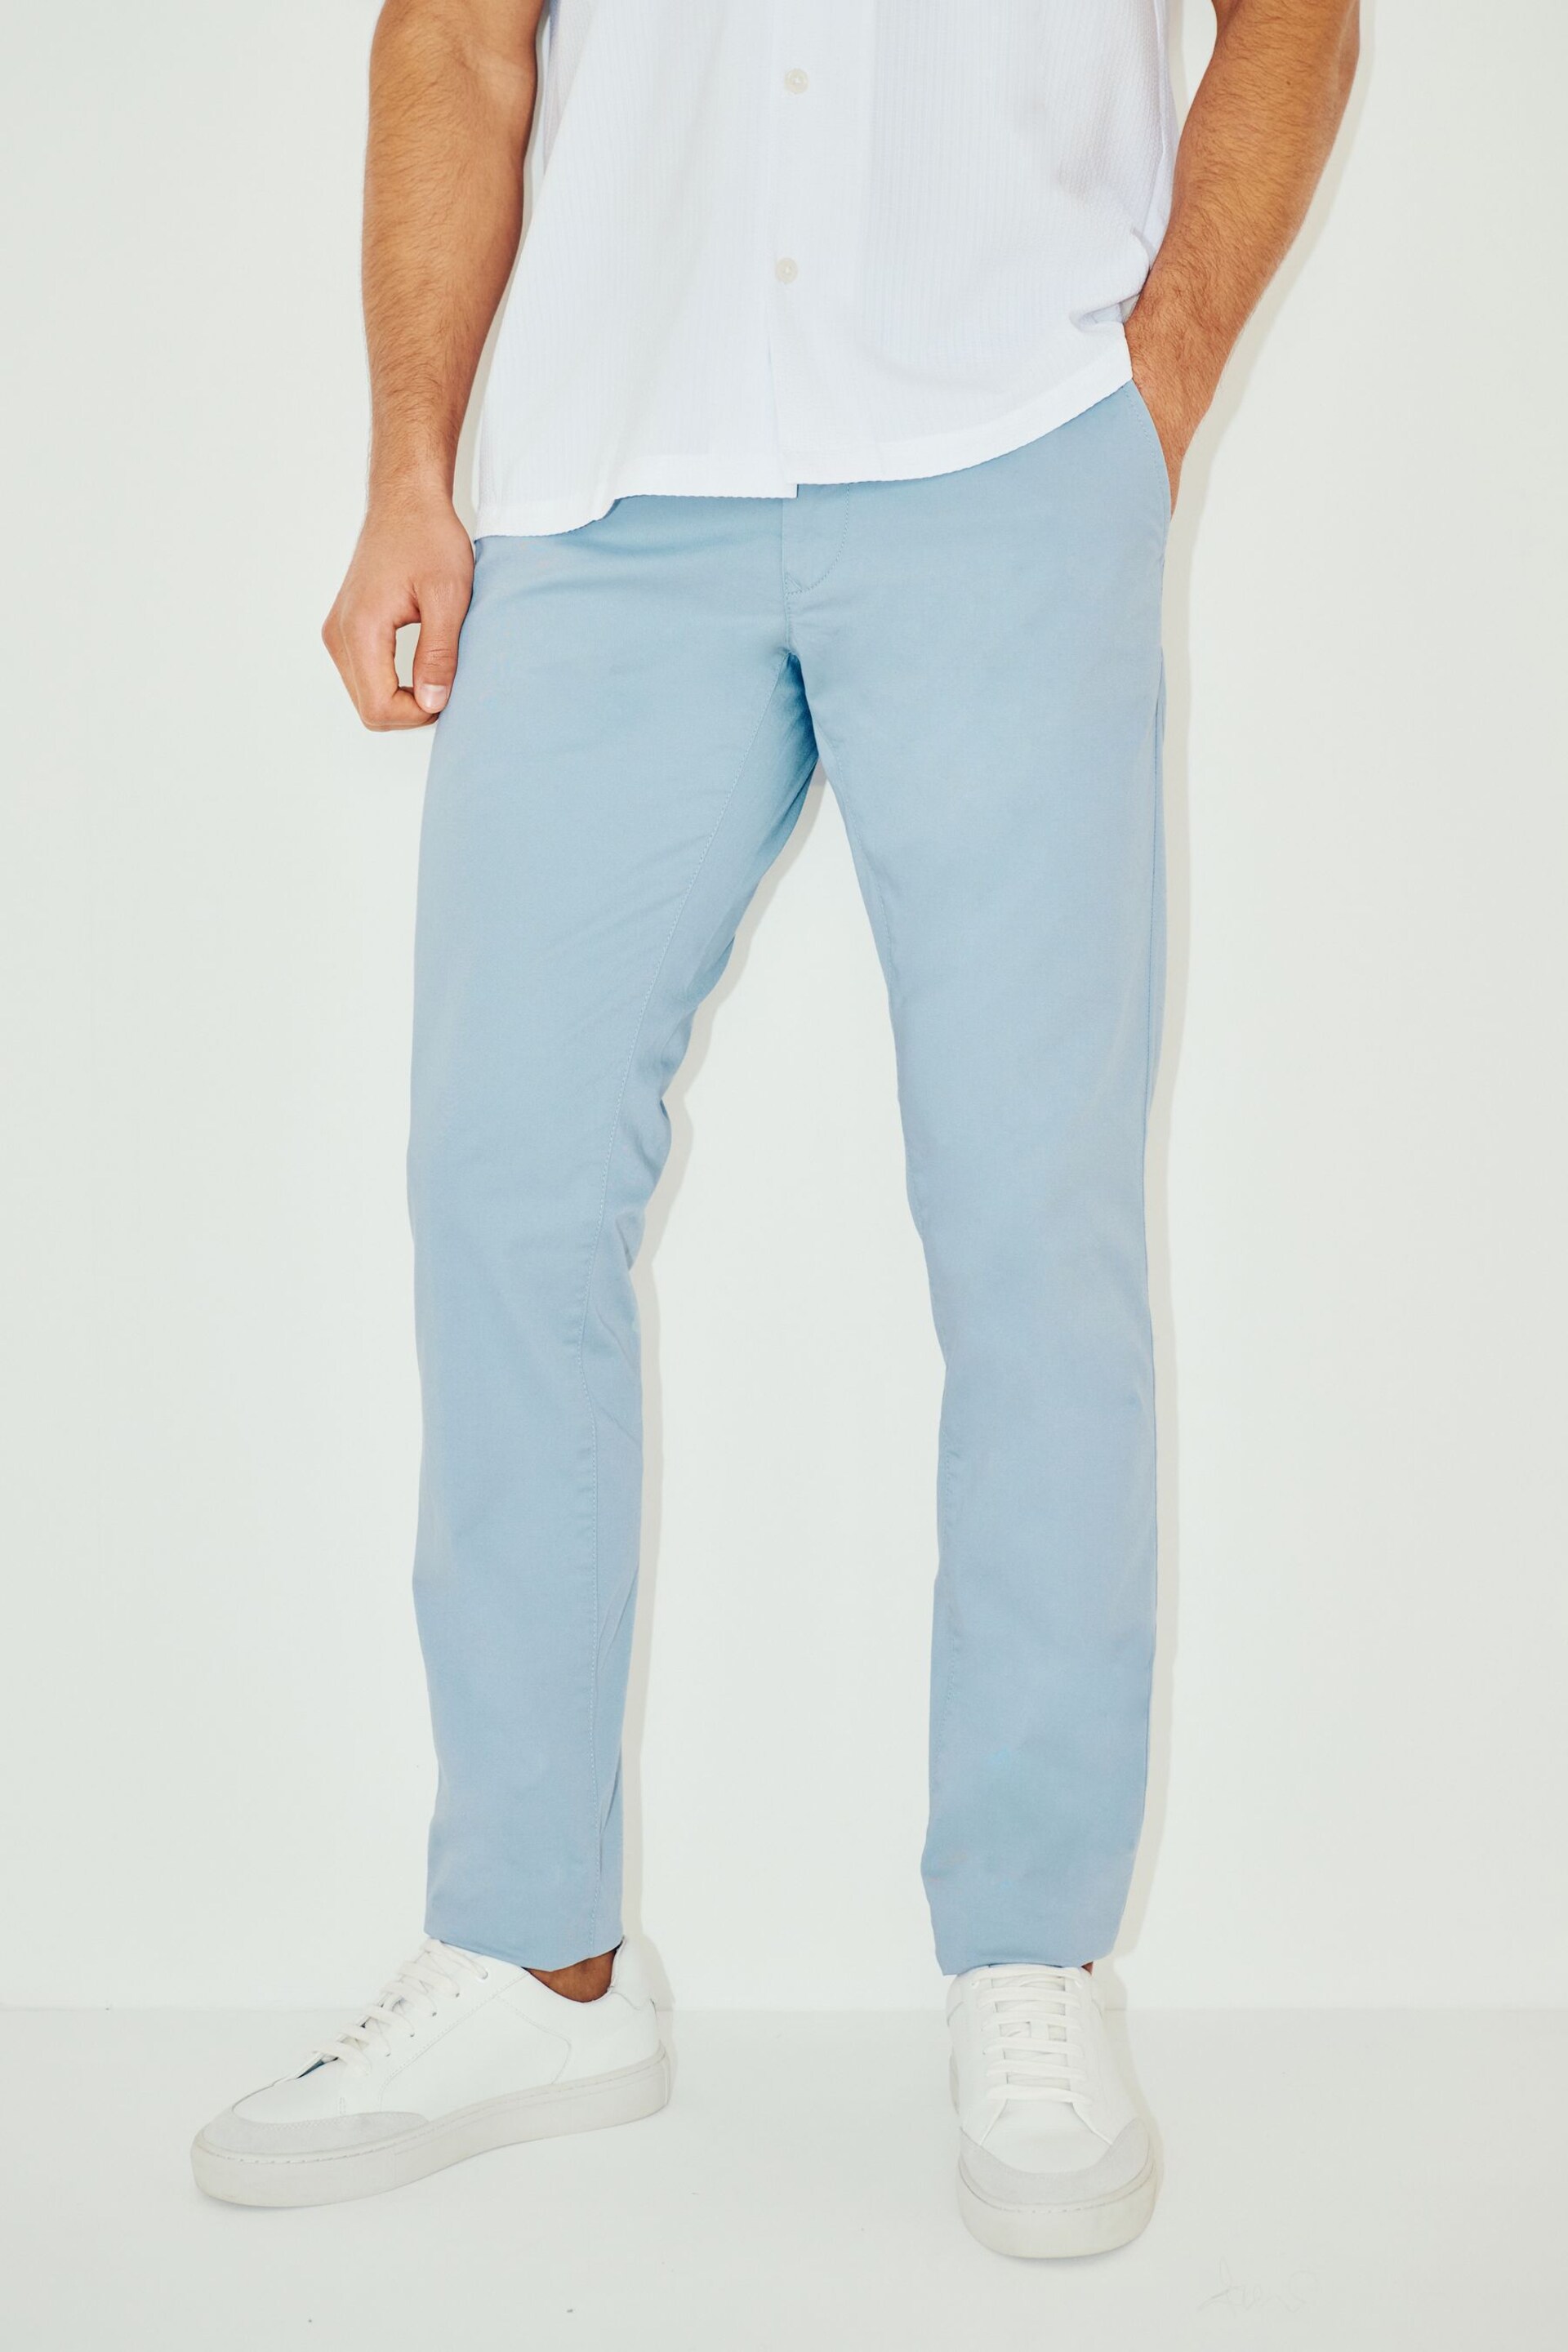 GANT Slim Fit Cotton Twill Chinos Trousers - Image 1 of 5